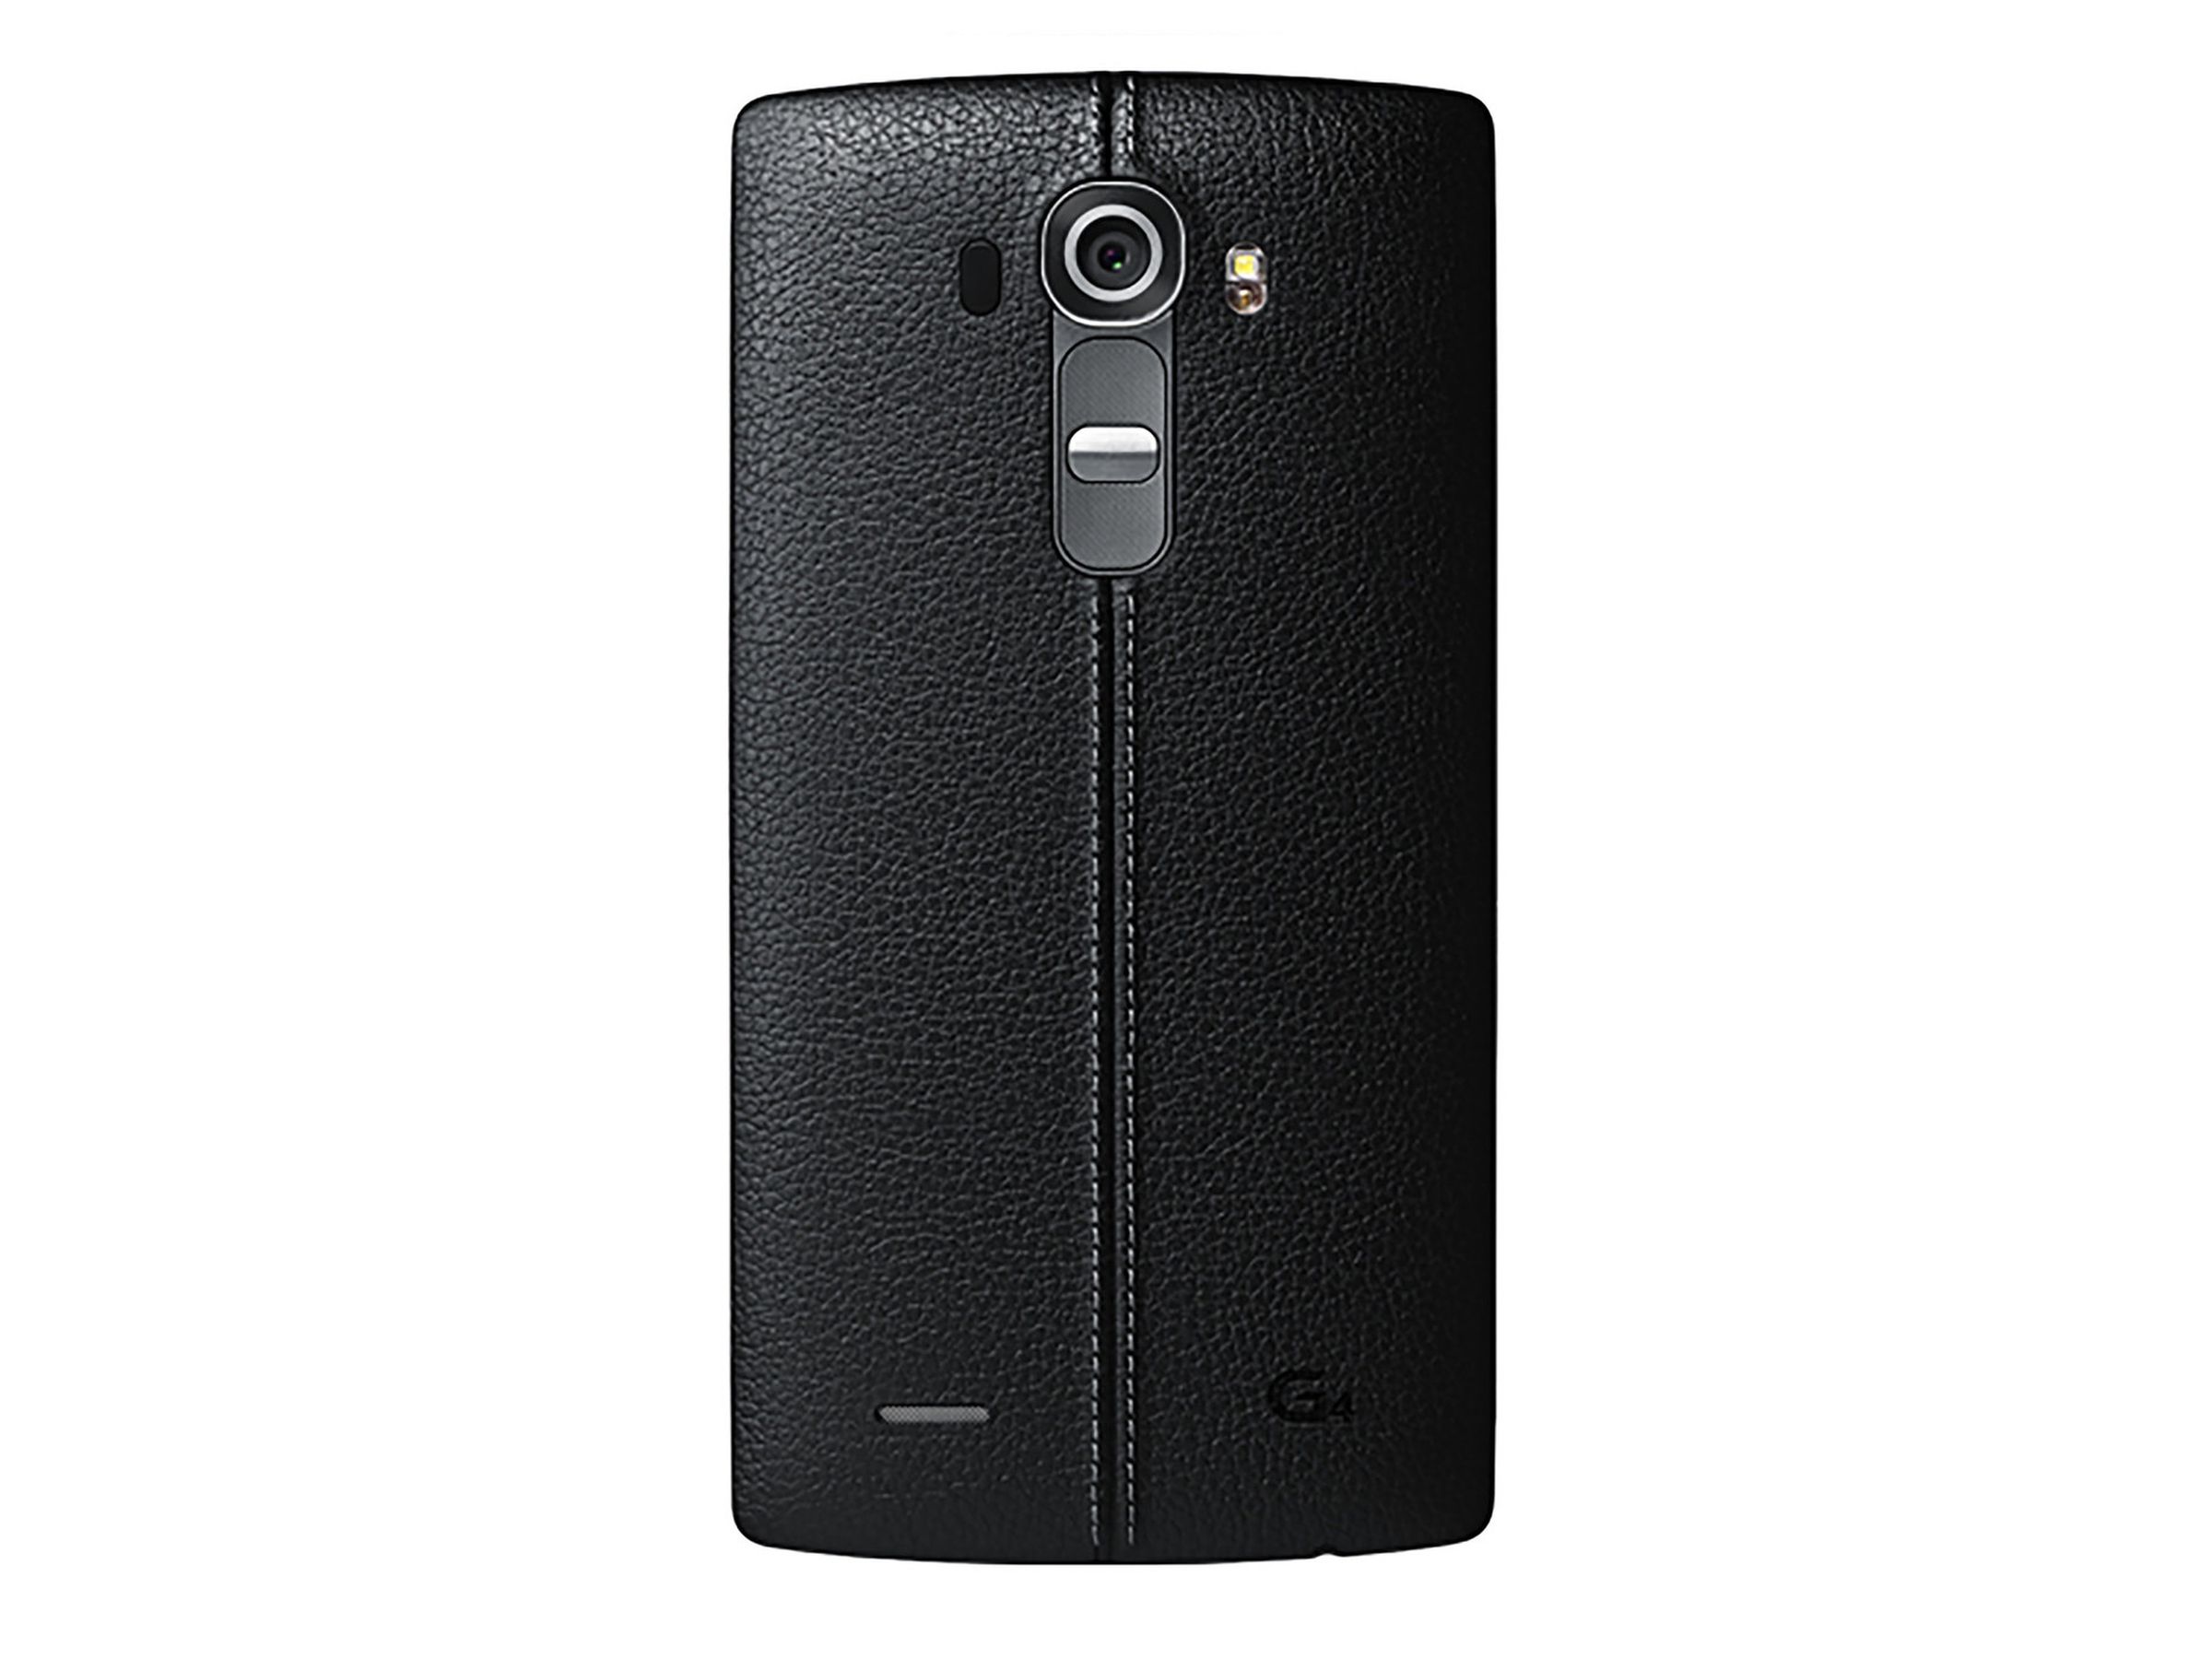 LG G4 leaked pictures